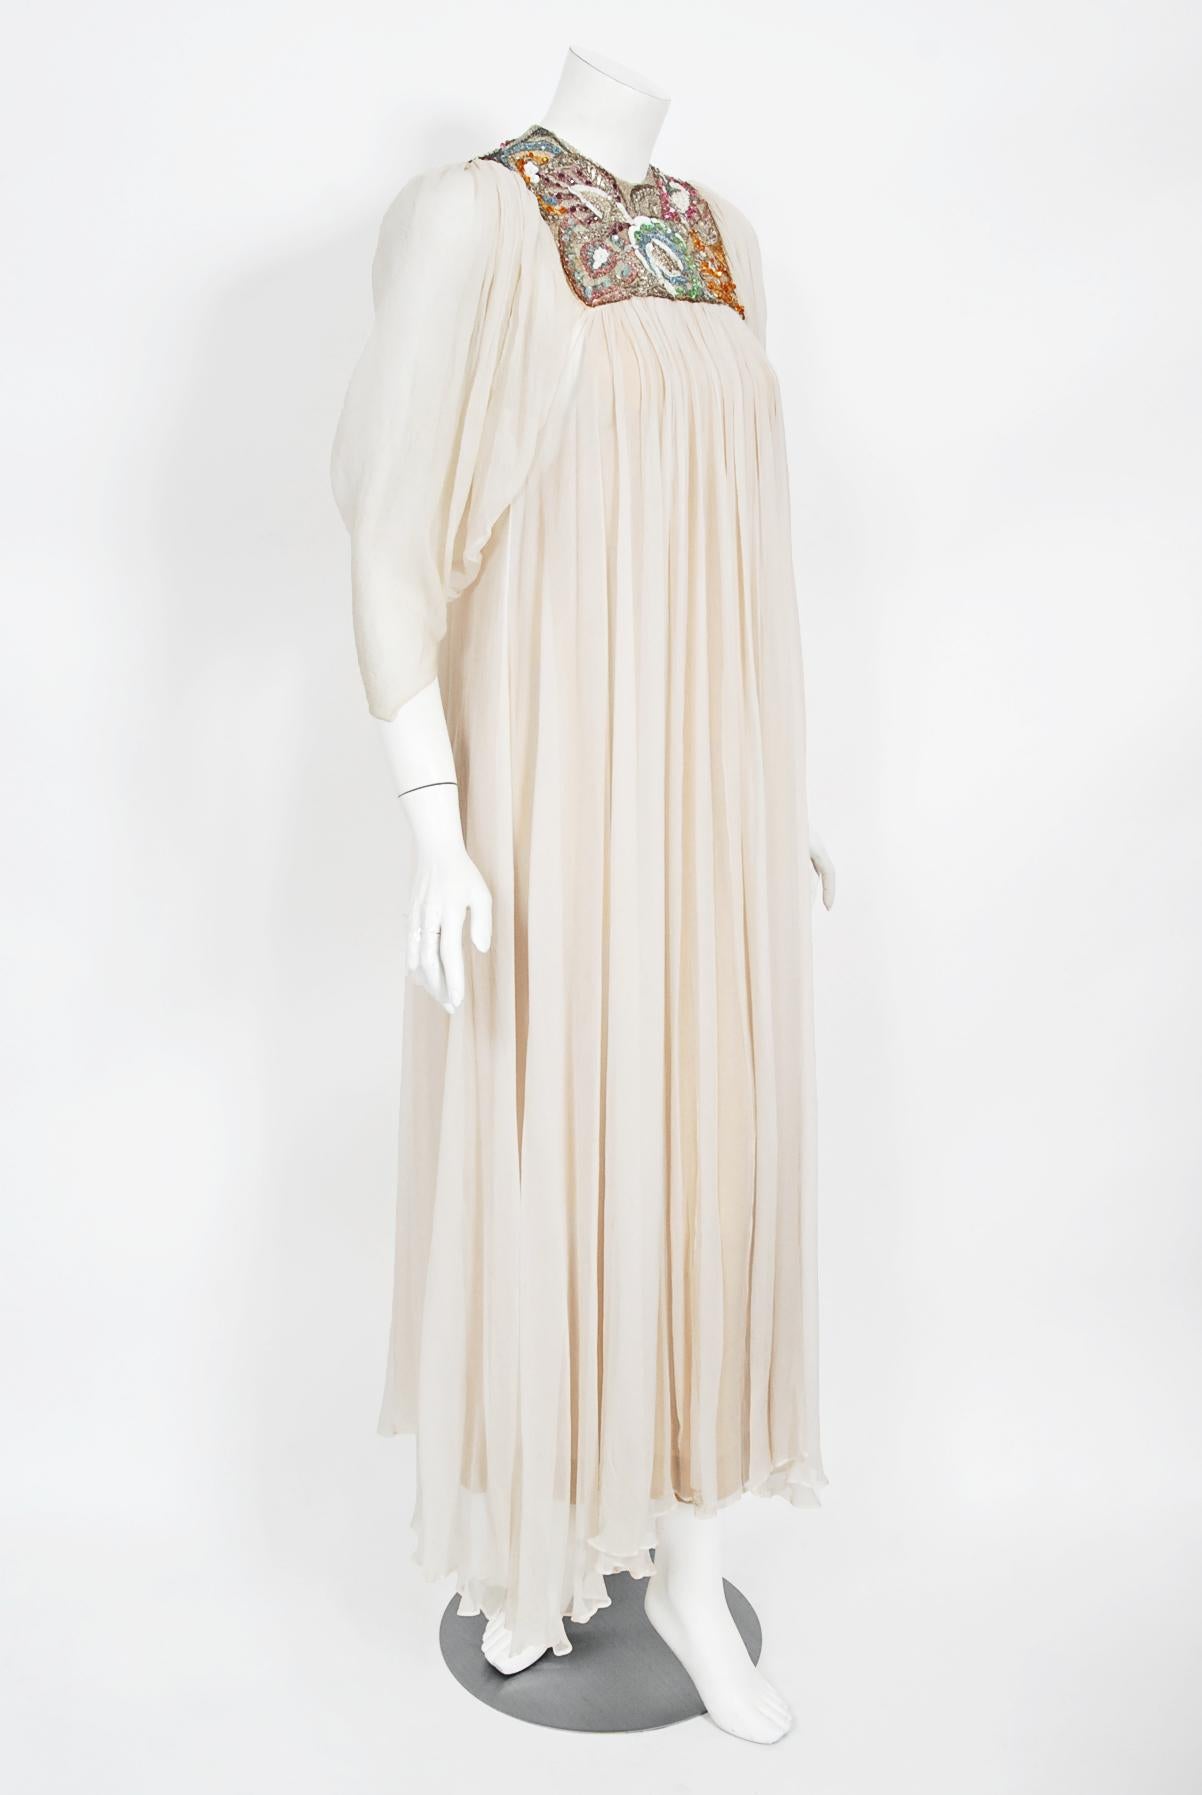 1970's Madame Grès Haute Couture Beaded Embroidered Ivory Sheer Silk Bridal Gown For Sale 1